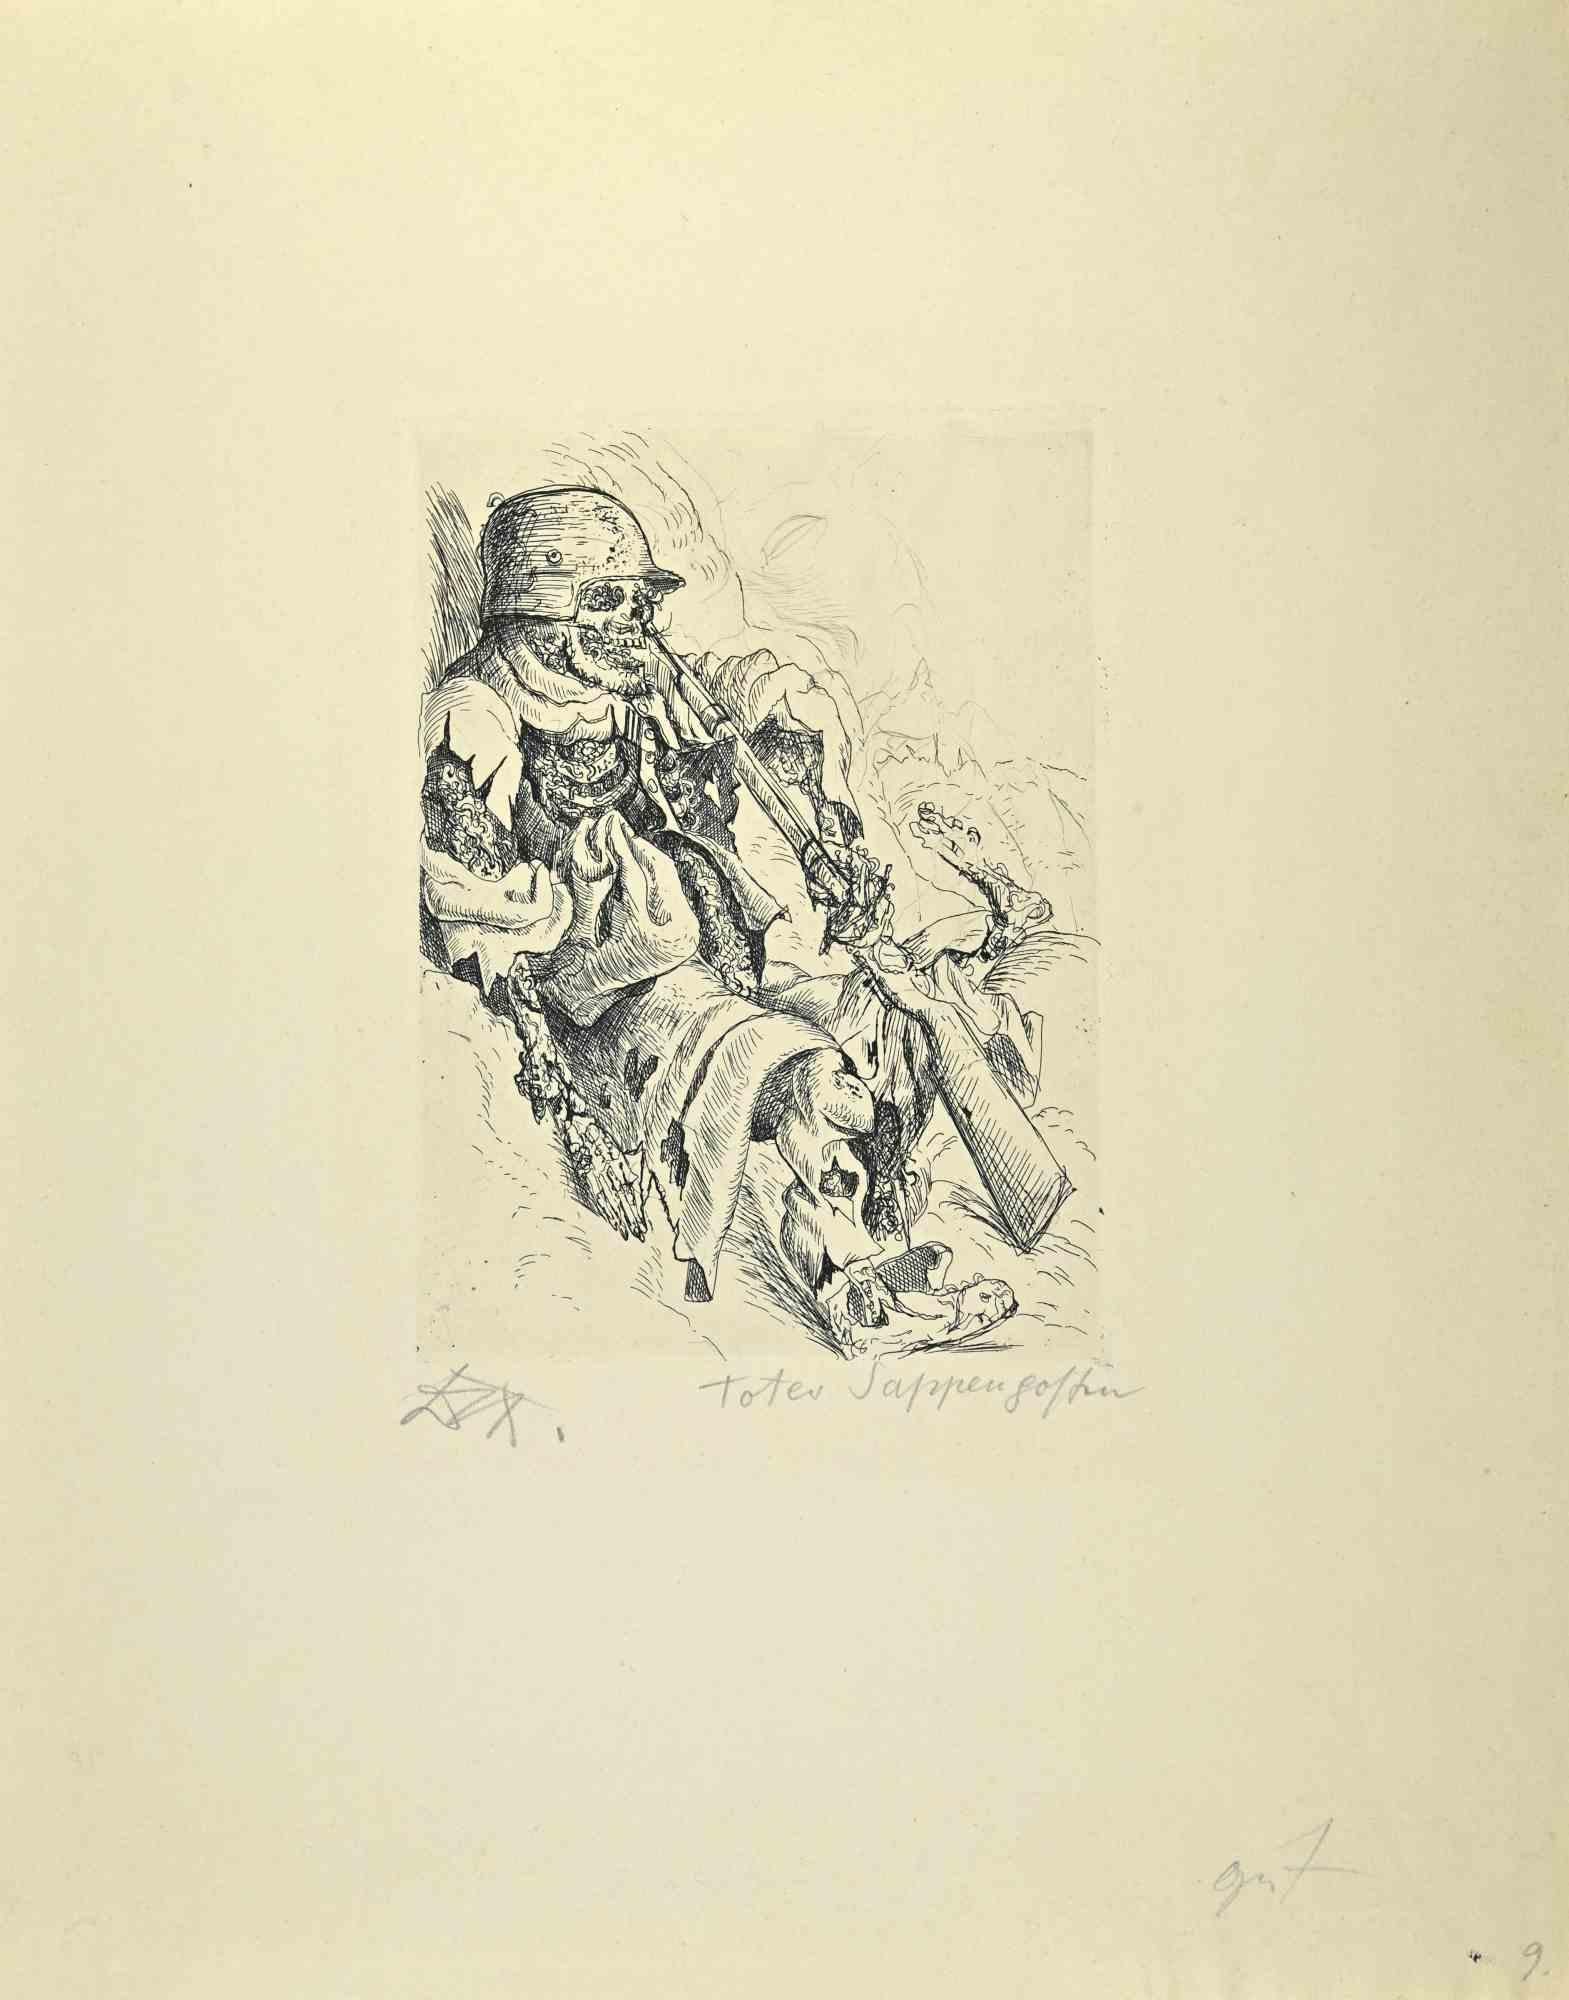 Toter Sappenposten (Dead Sentry in the Trench) is an Etching and dryopint realized by Otto Dix in 1924.

It belongs to the Suite 